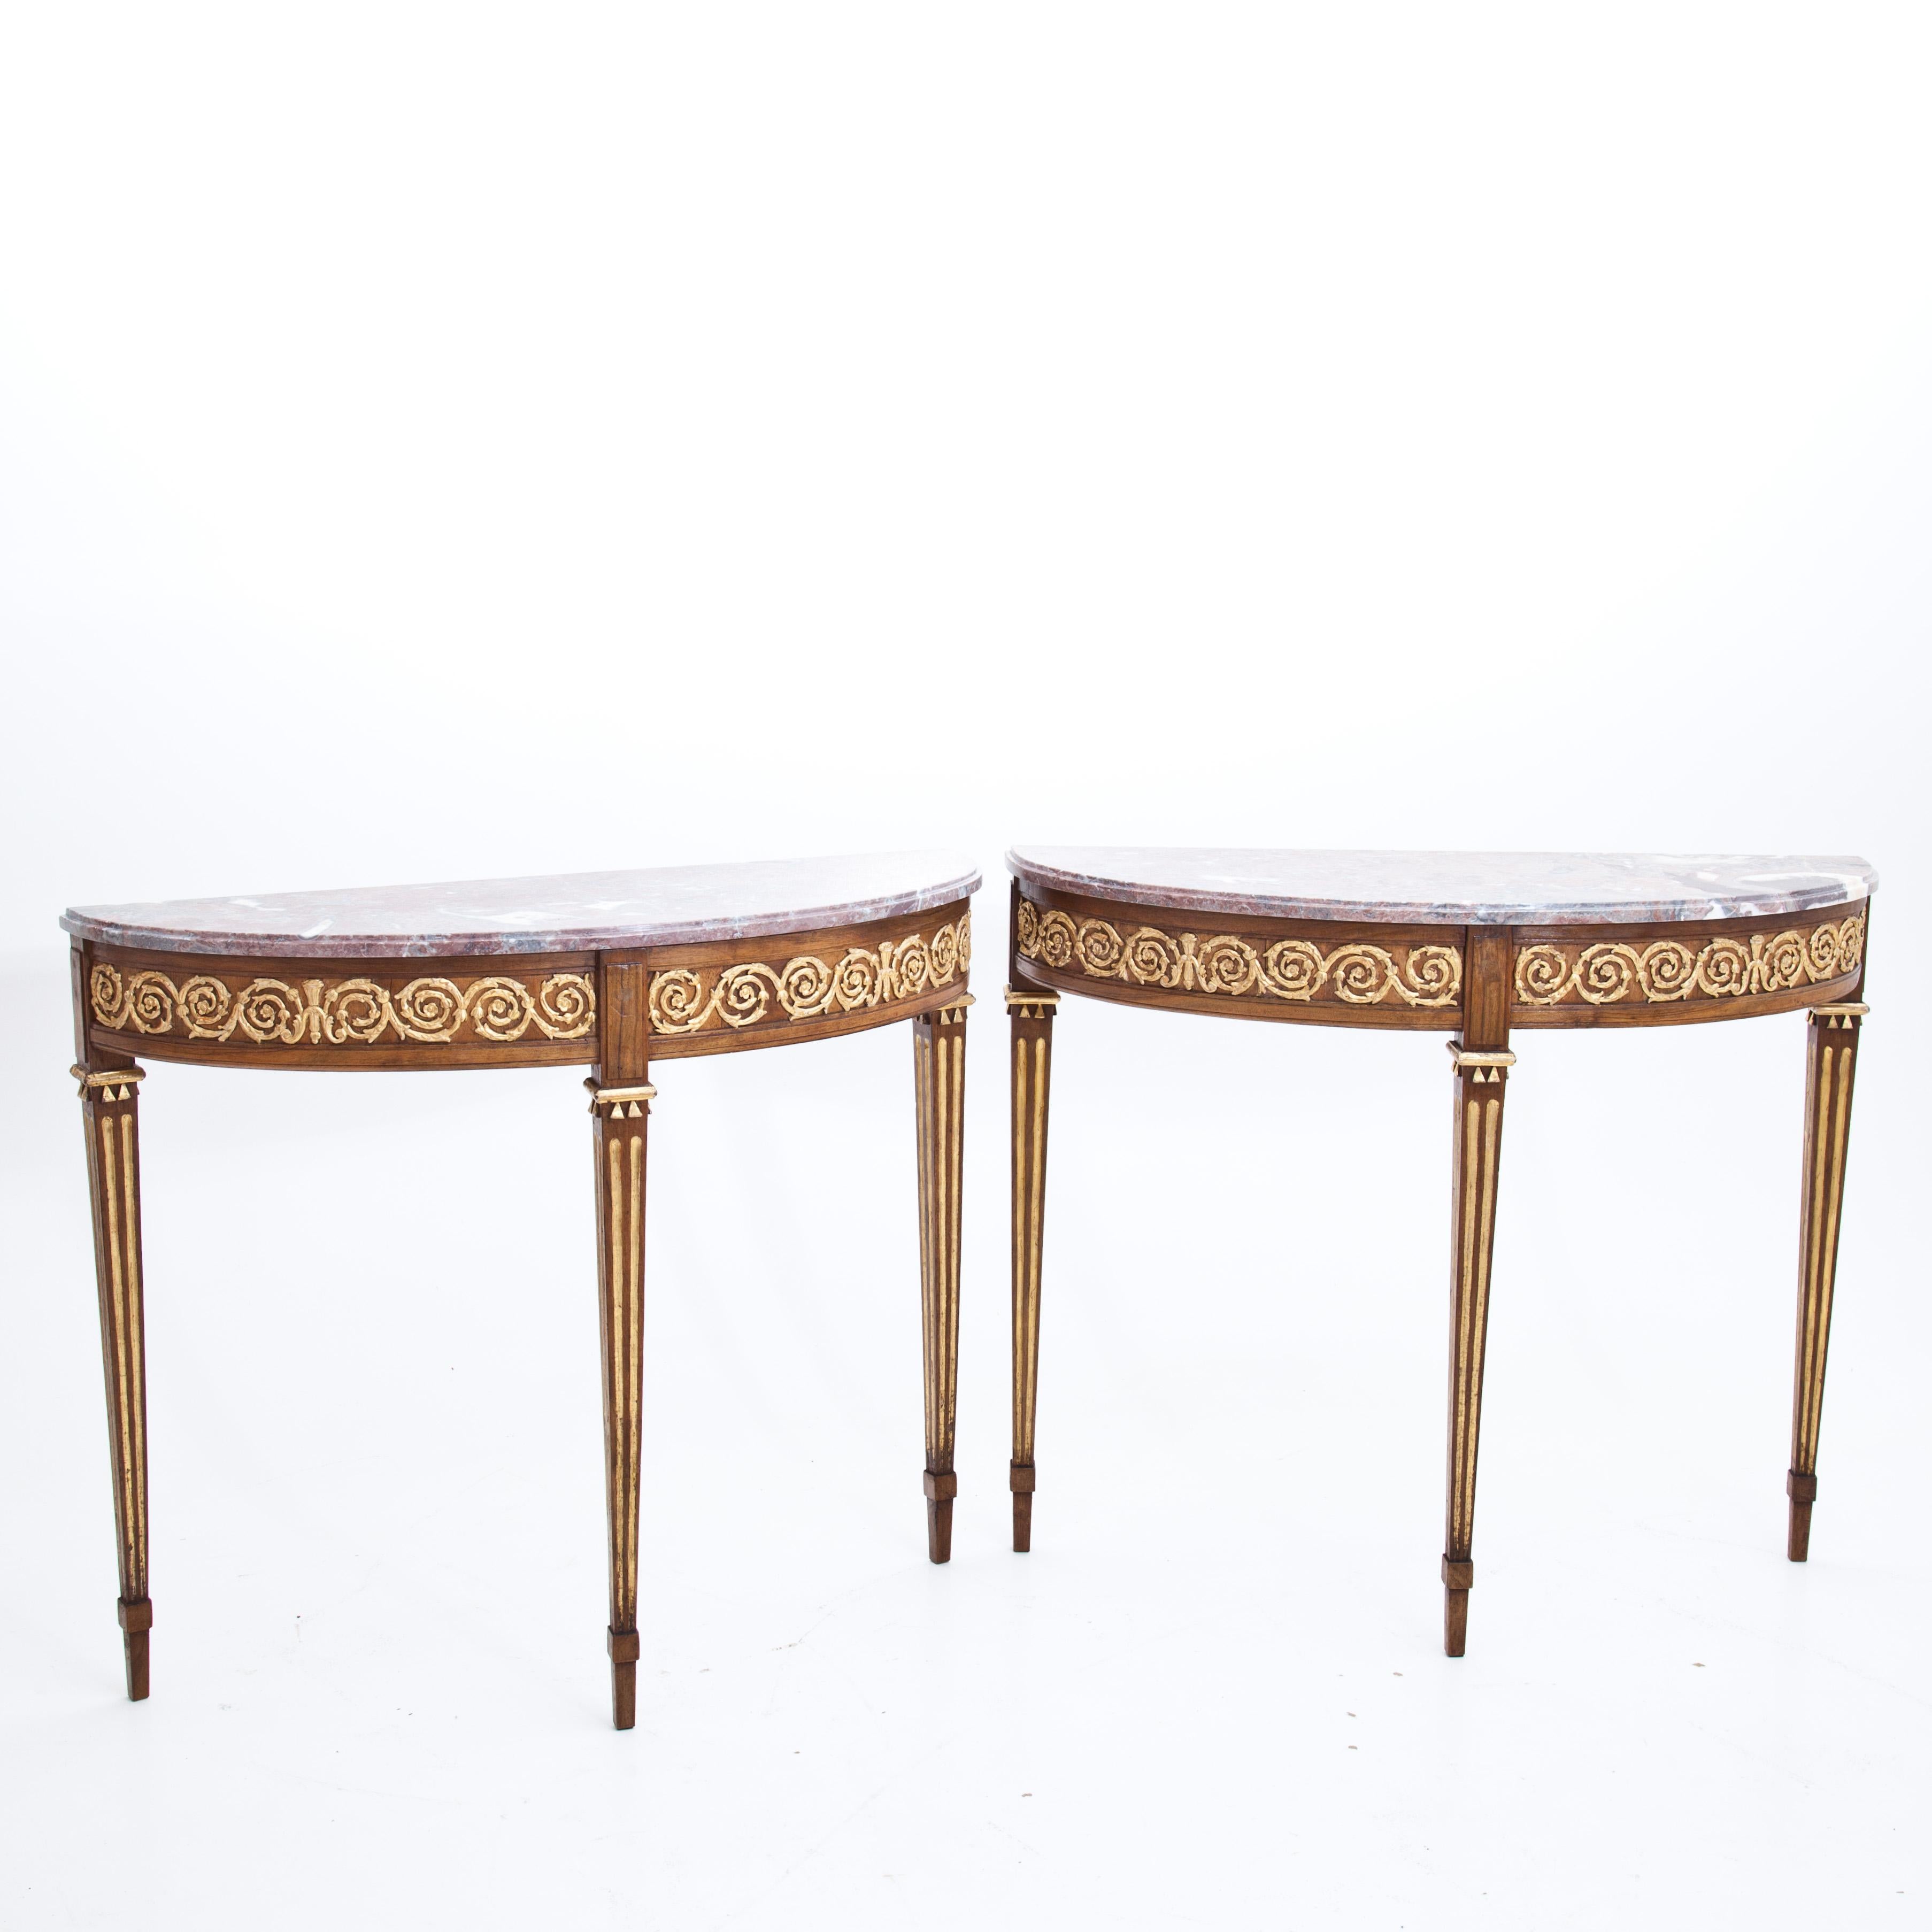 Pair of demilune consoles in solid walnut, on fluted square-tapered feet, with red marble tops and gilded, stuccoed meandering ribbon of tendrils on the sides. The consoles were redesigned using old parts. The marble tops are recent. Partly